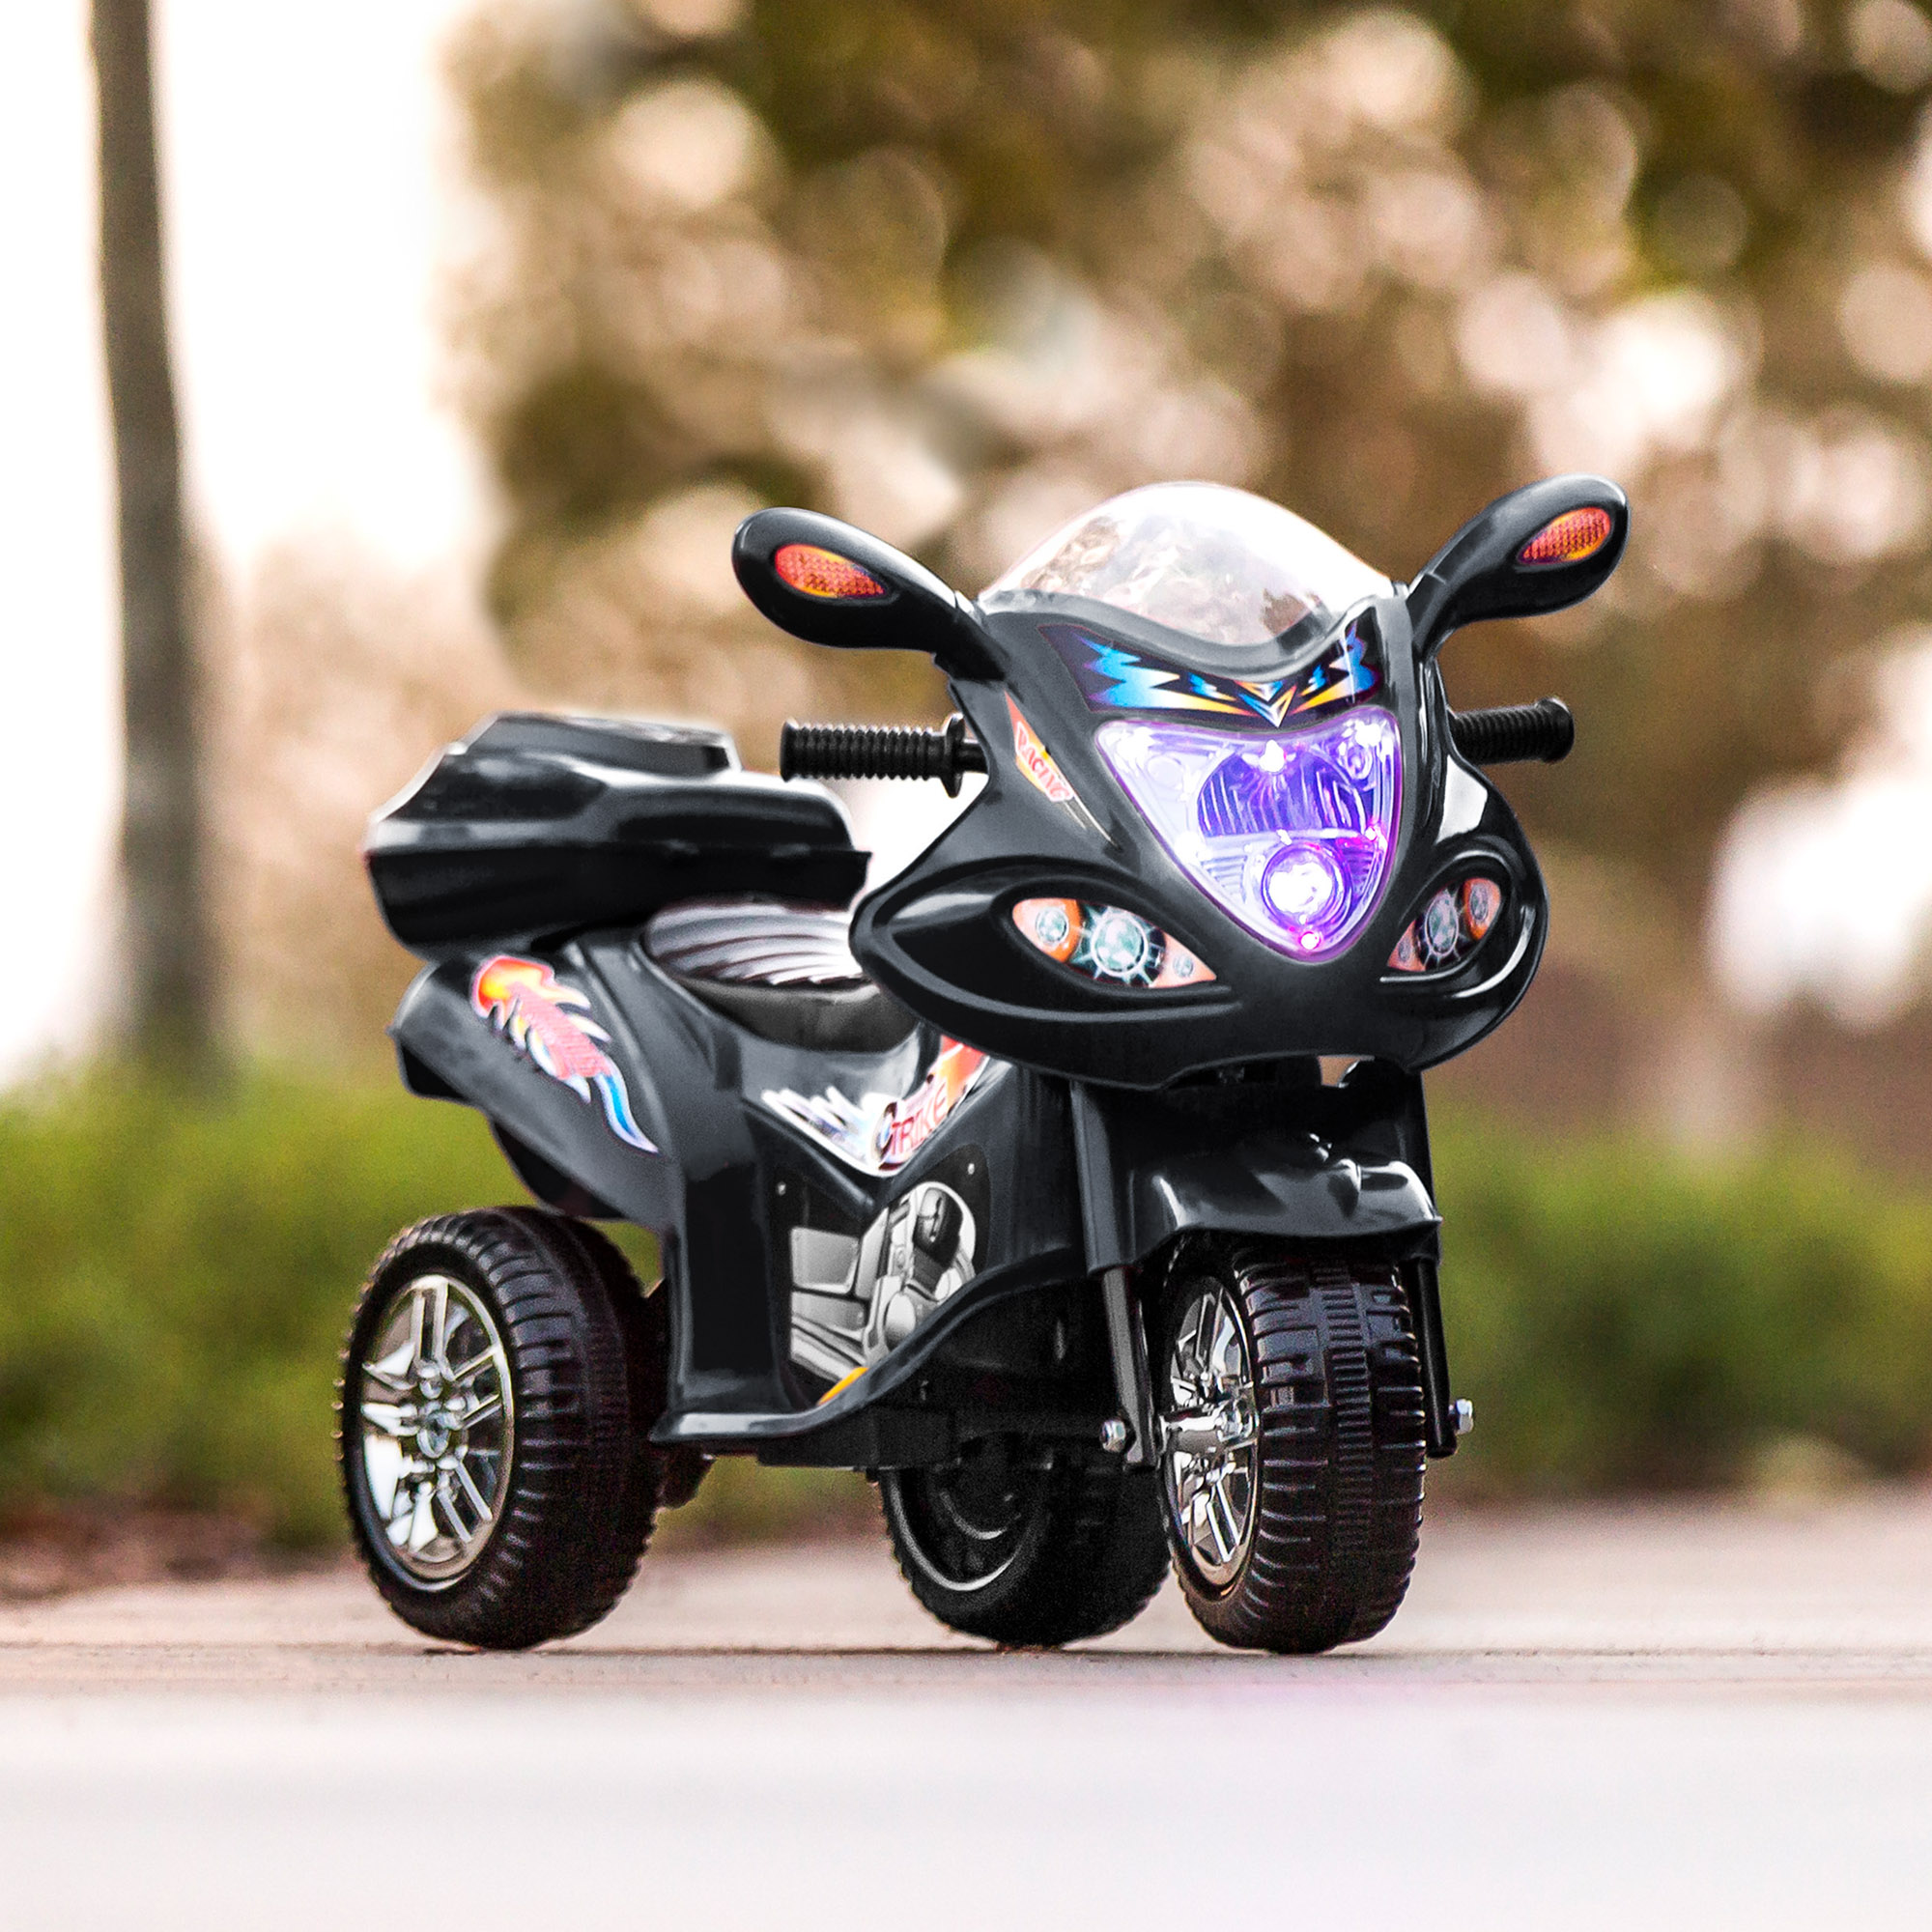 Best Choice Products 6V Kids Battery Powered 3-Wheel Motorcycle Ride On Toy w/ LED Lights, Music, Horn, Storage - Black - image 2 of 6